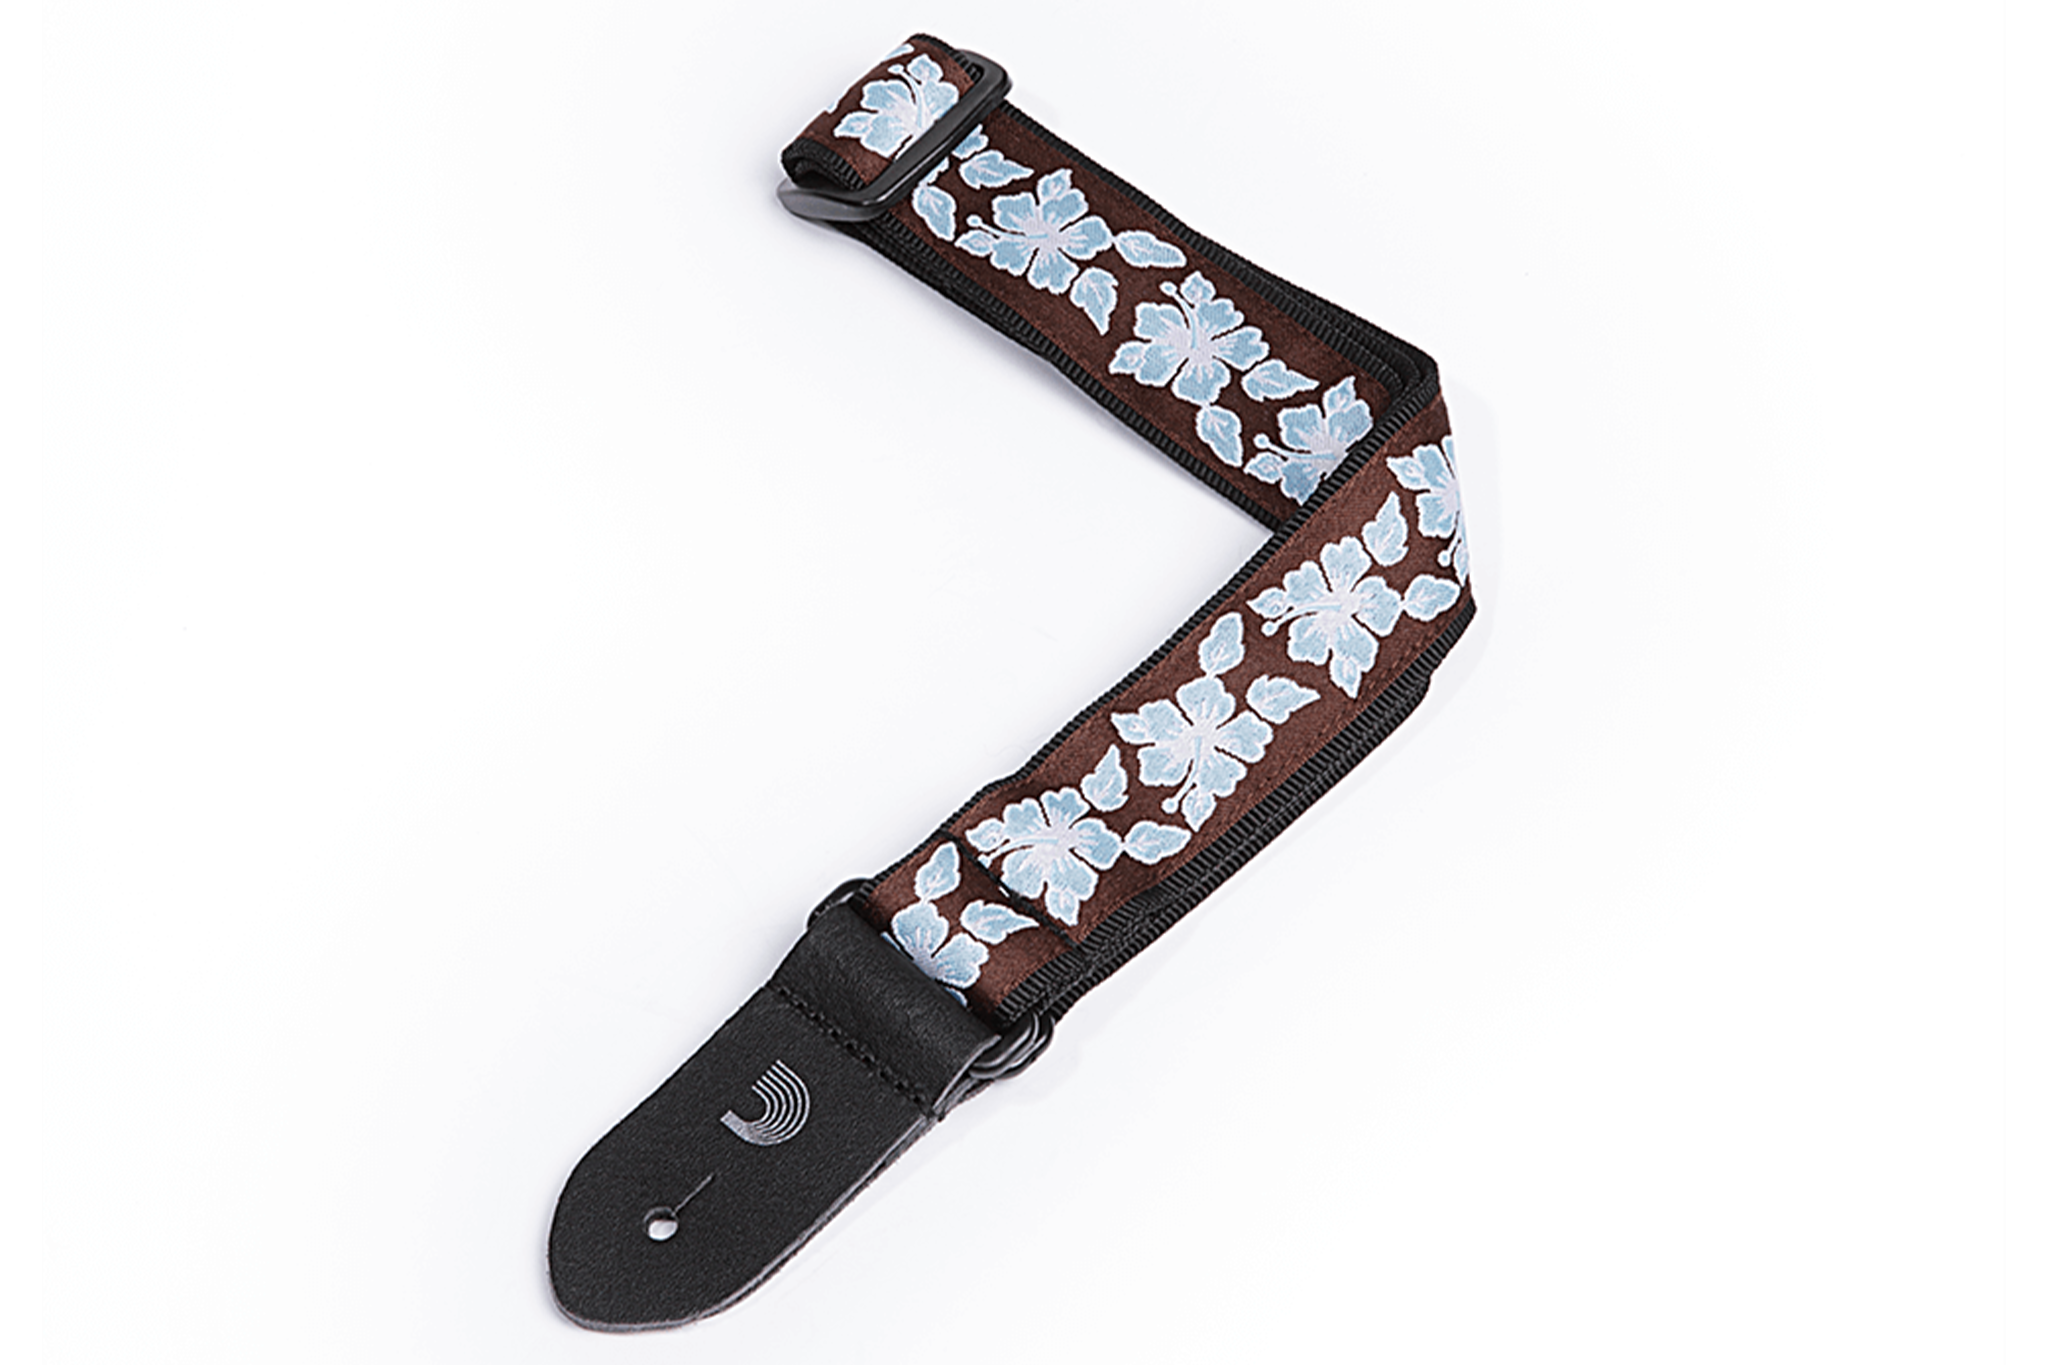 D'Addario Ukulele Strap Woven ALOHA BROWN w/WHITE and BLUE Floral 1-1/2 Inch